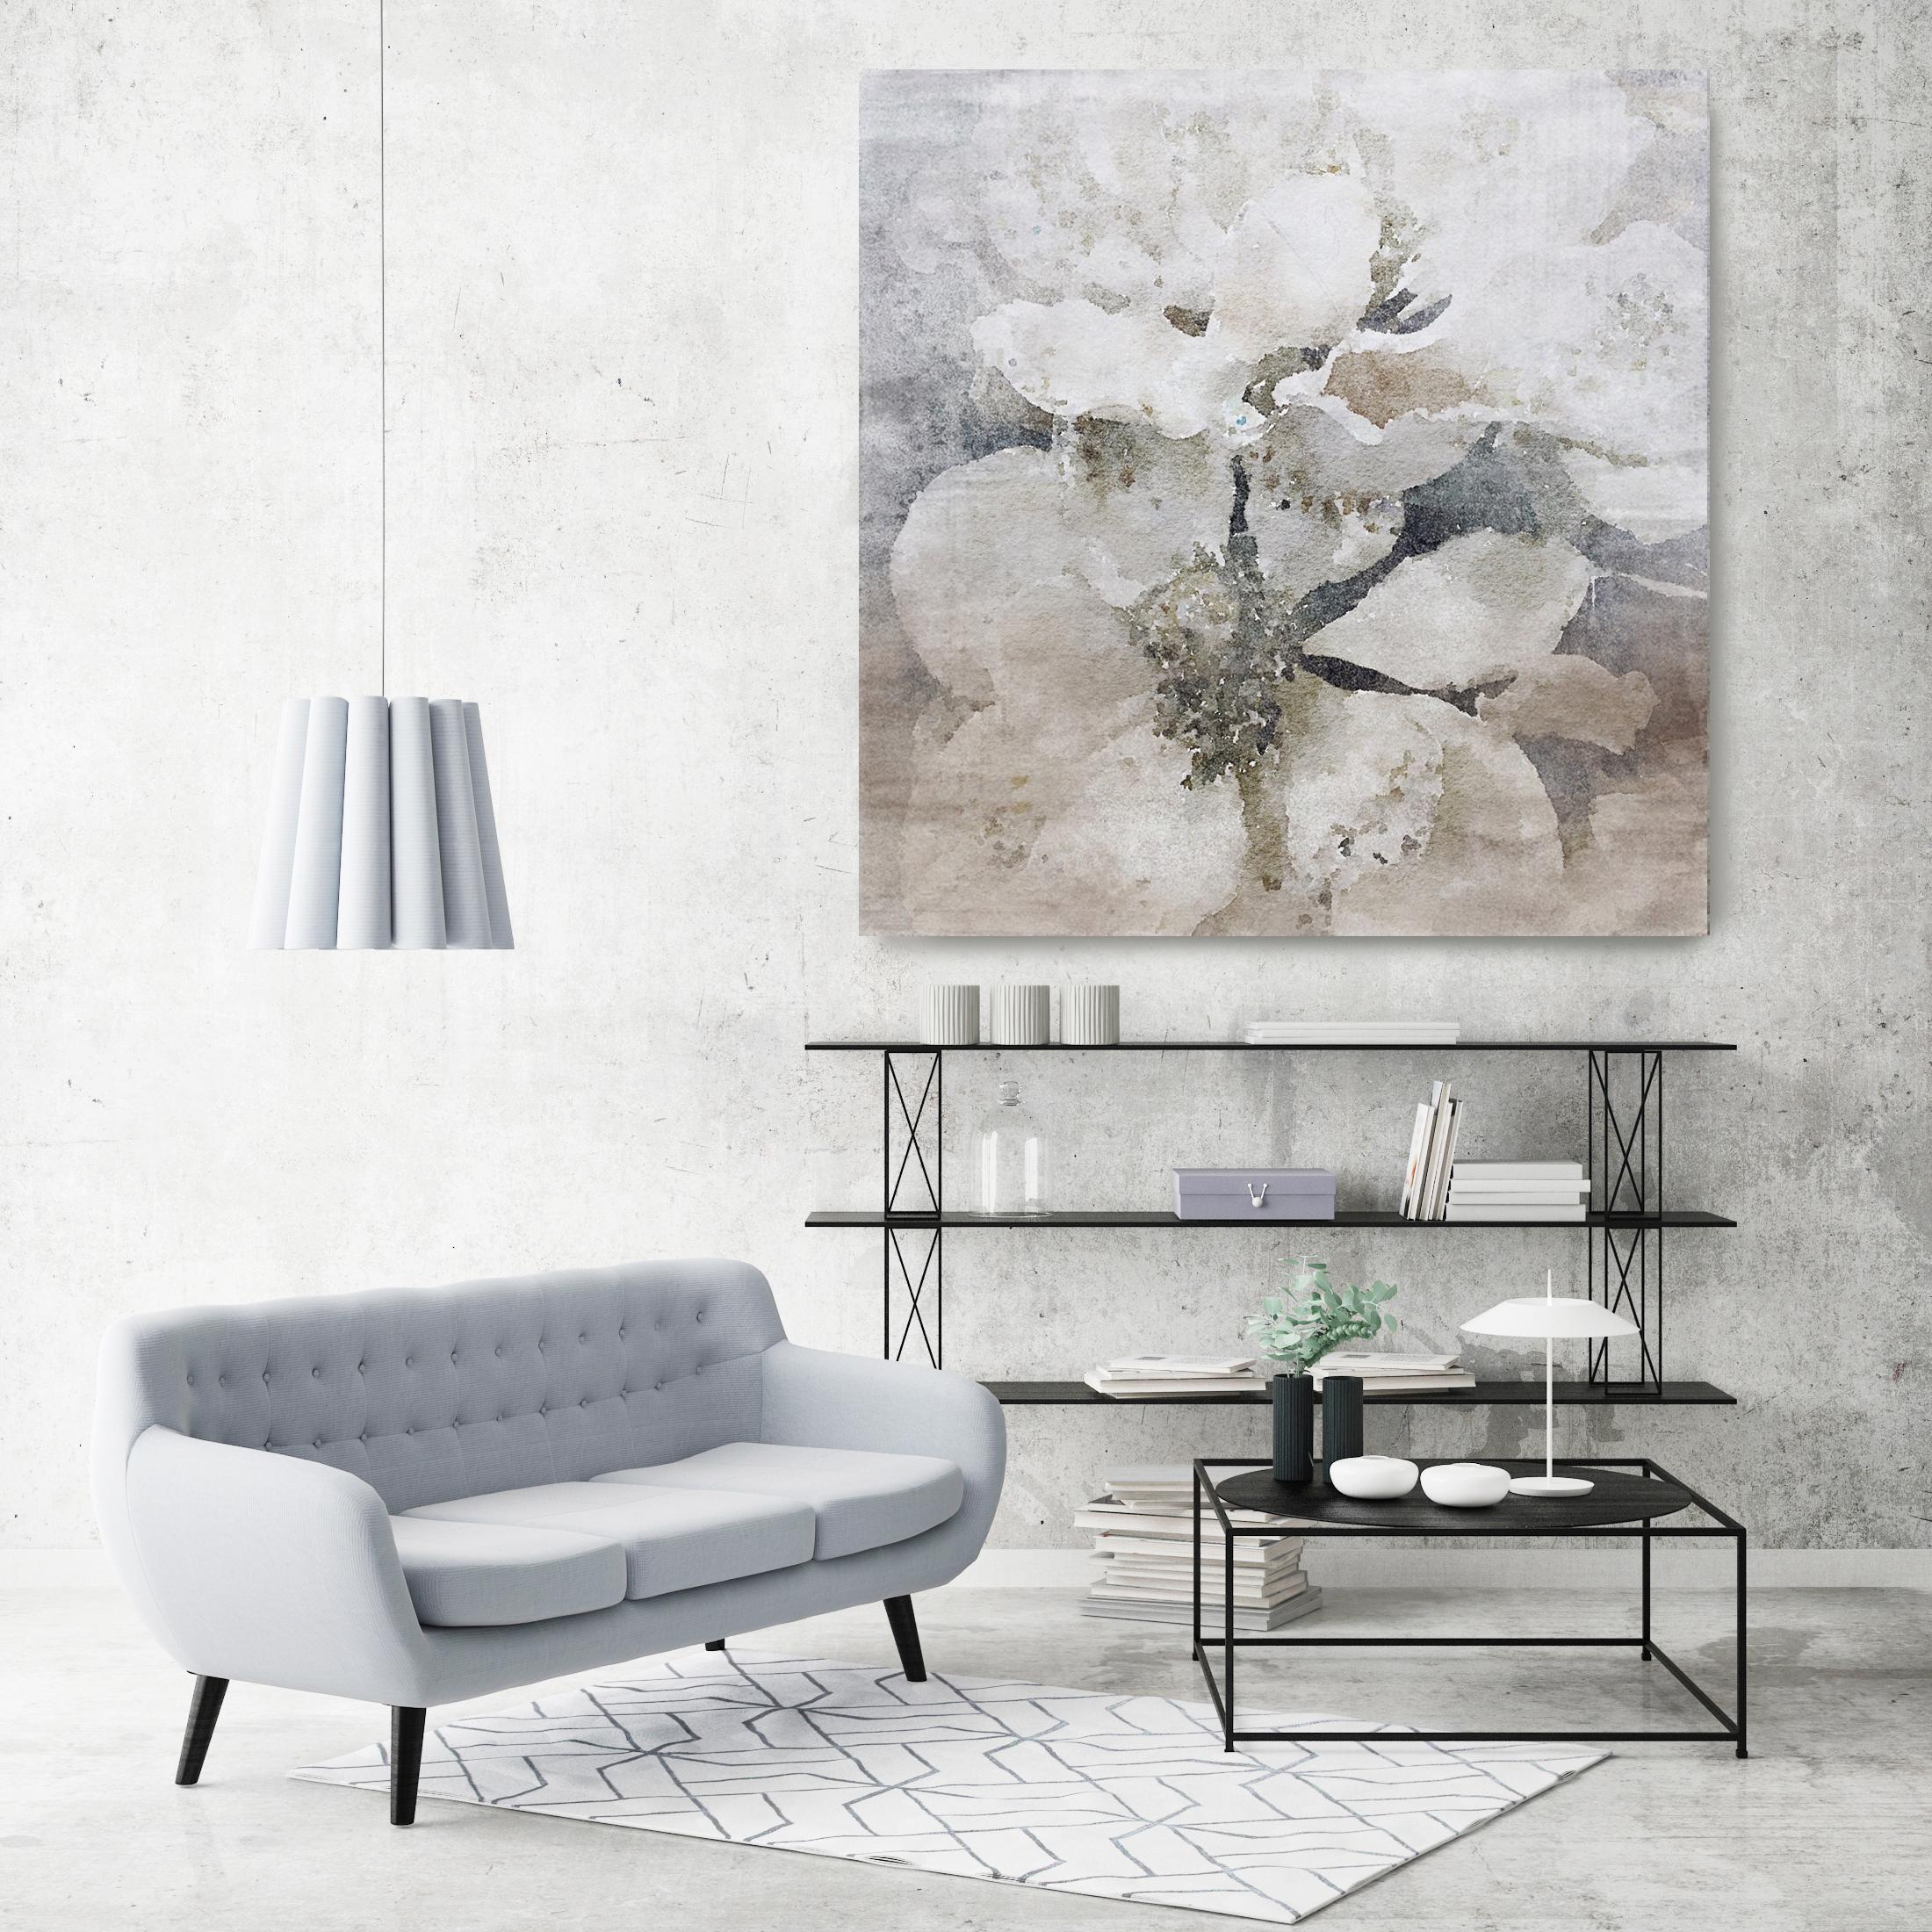 Lightly Frosted Silver Rustic Flowers Art Textured Giclee on Canvas 45x45